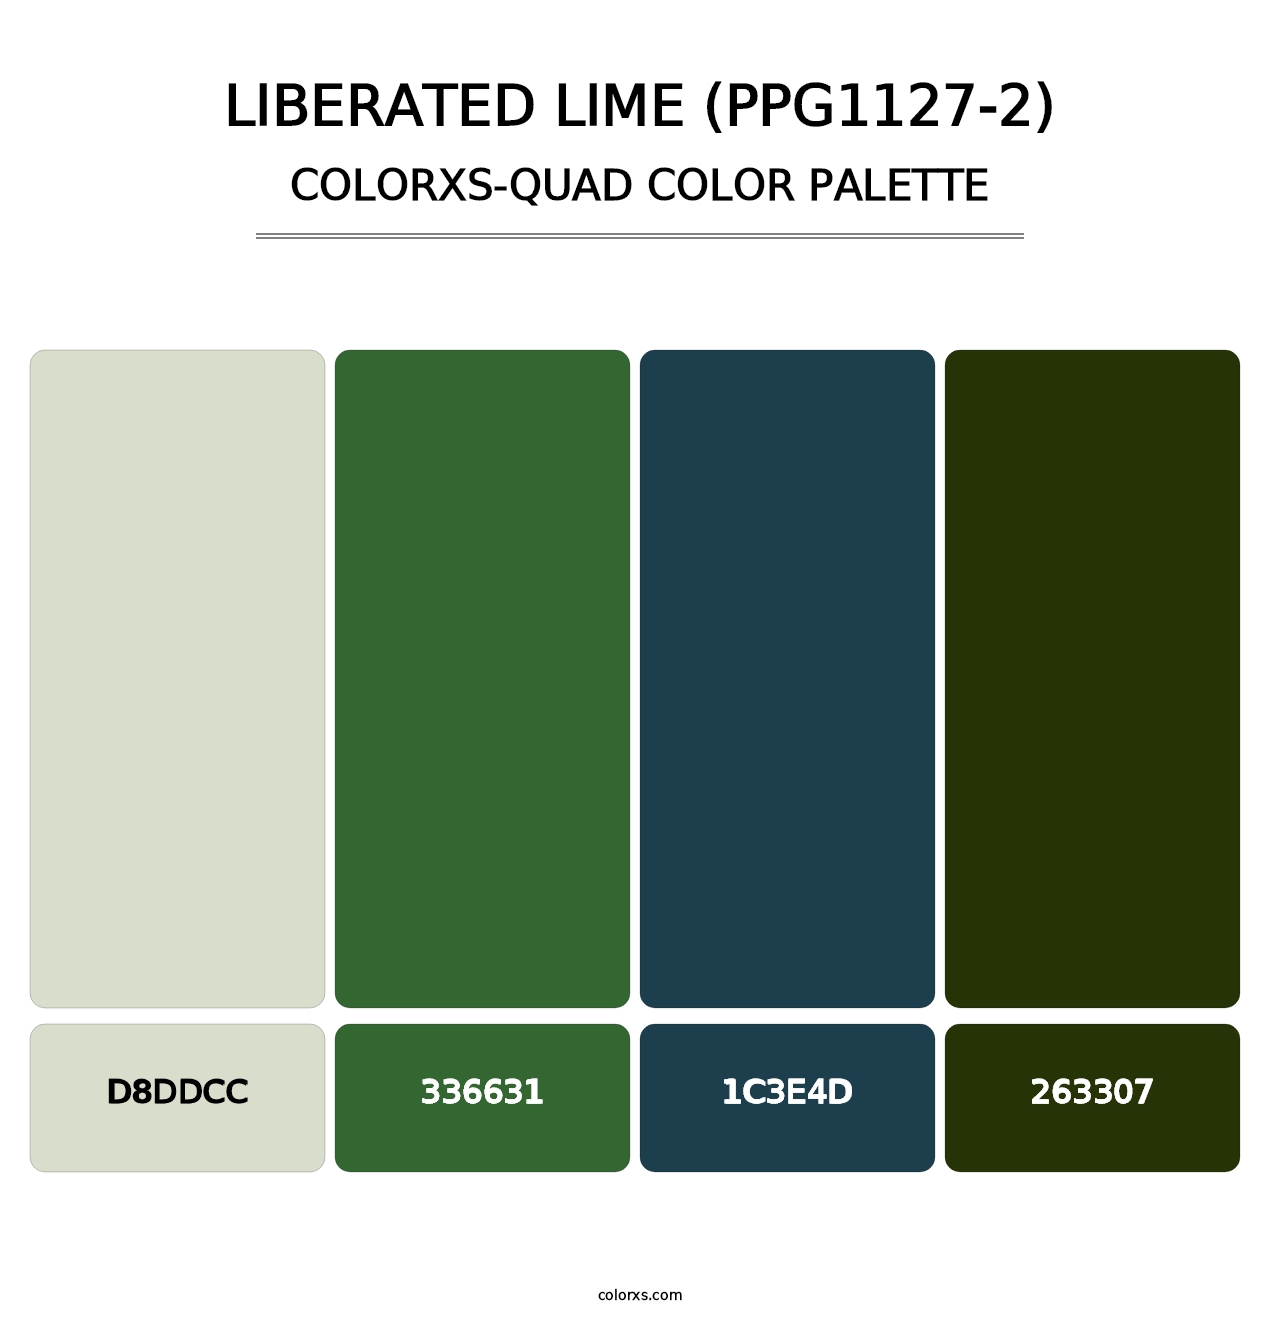 Liberated Lime (PPG1127-2) - Colorxs Quad Palette